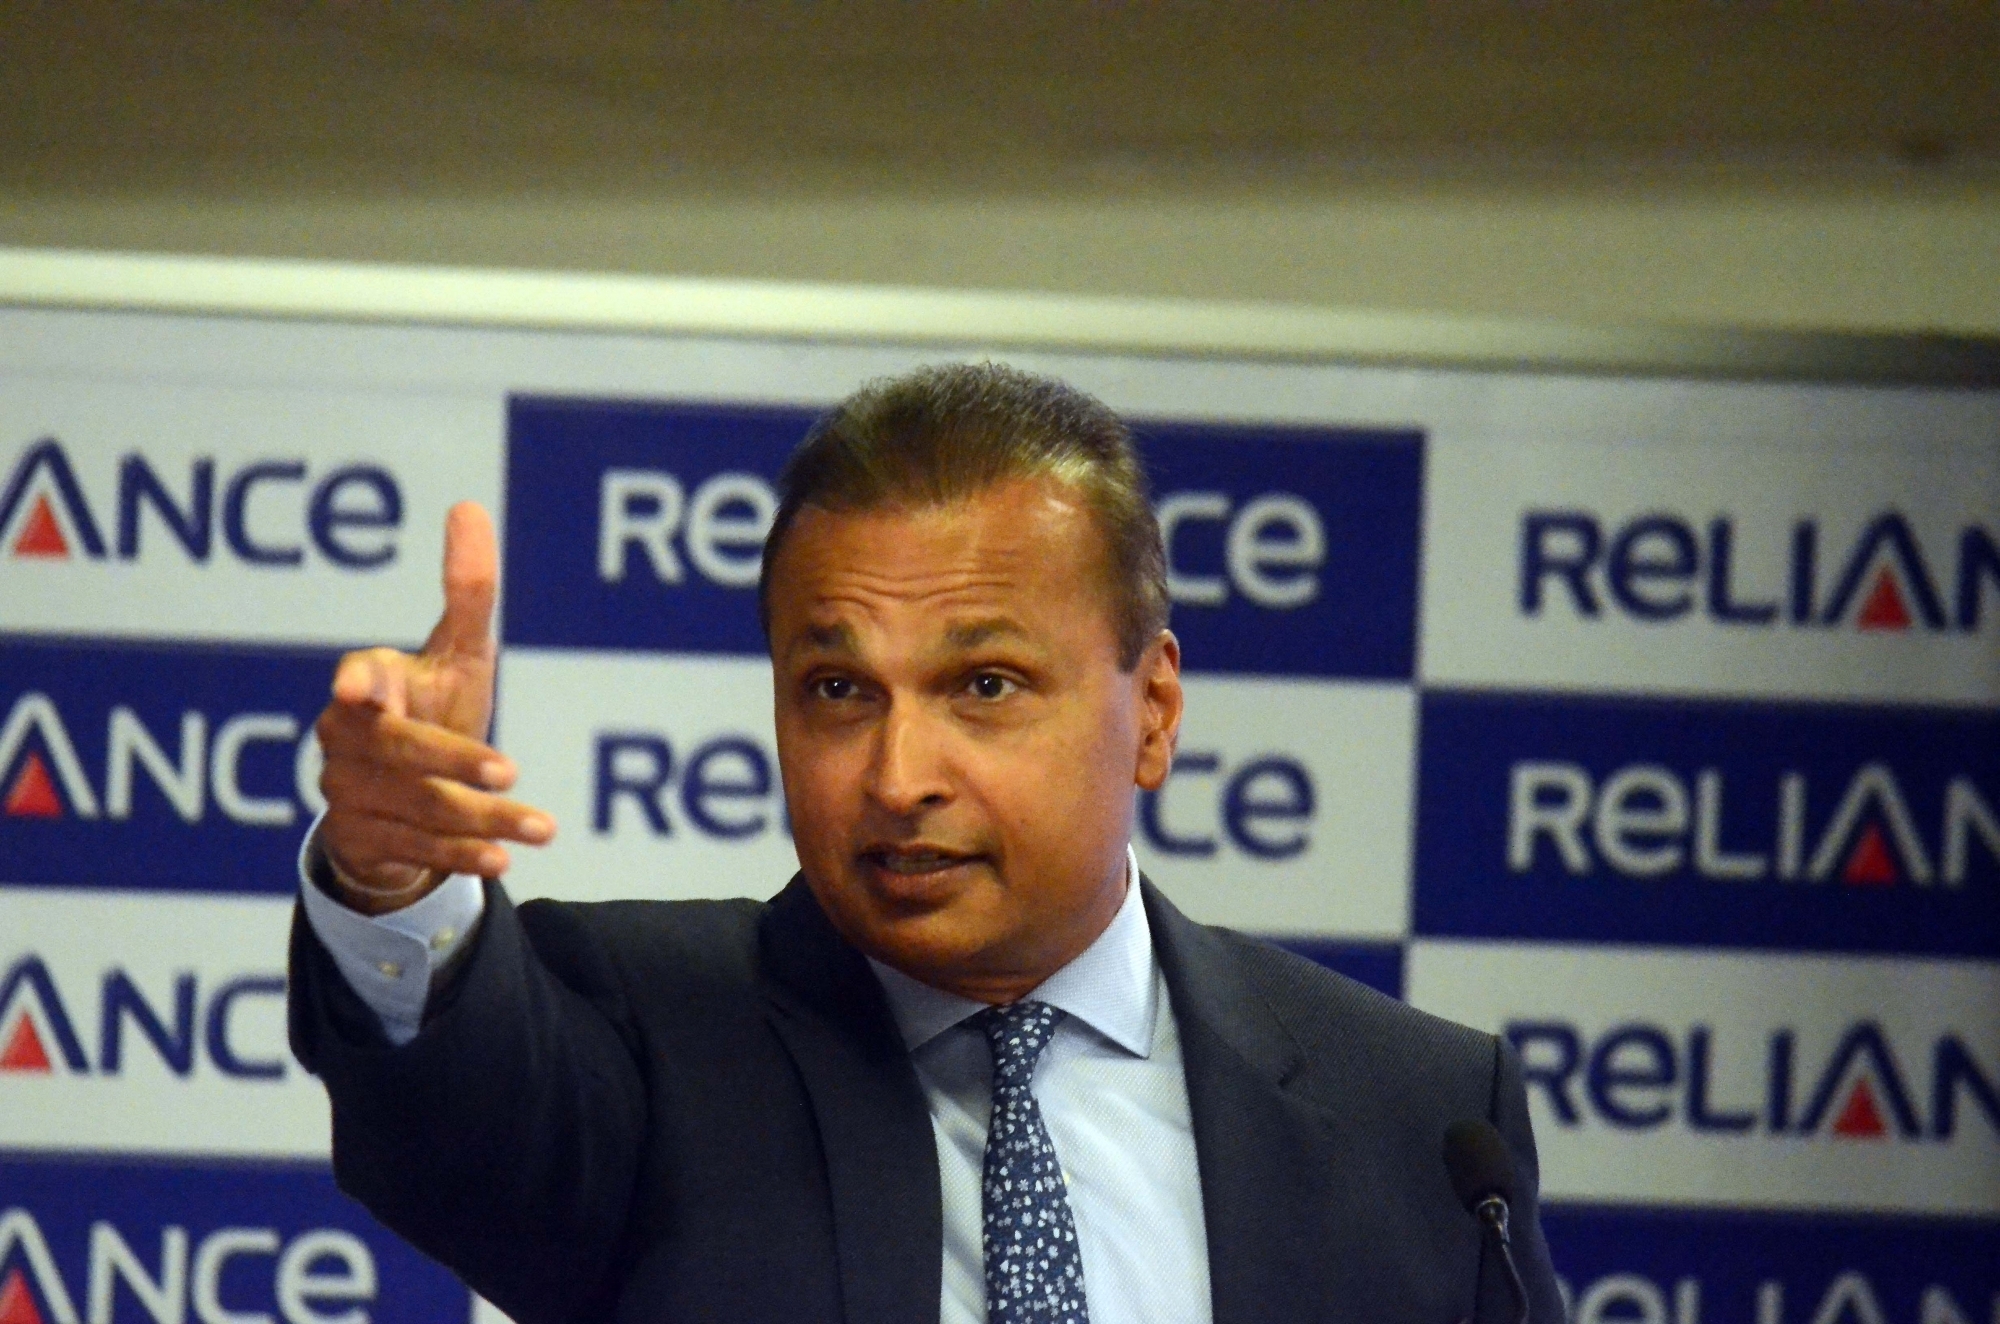 Reliance rejects rumours of corruption in winning mediclaim policy contract